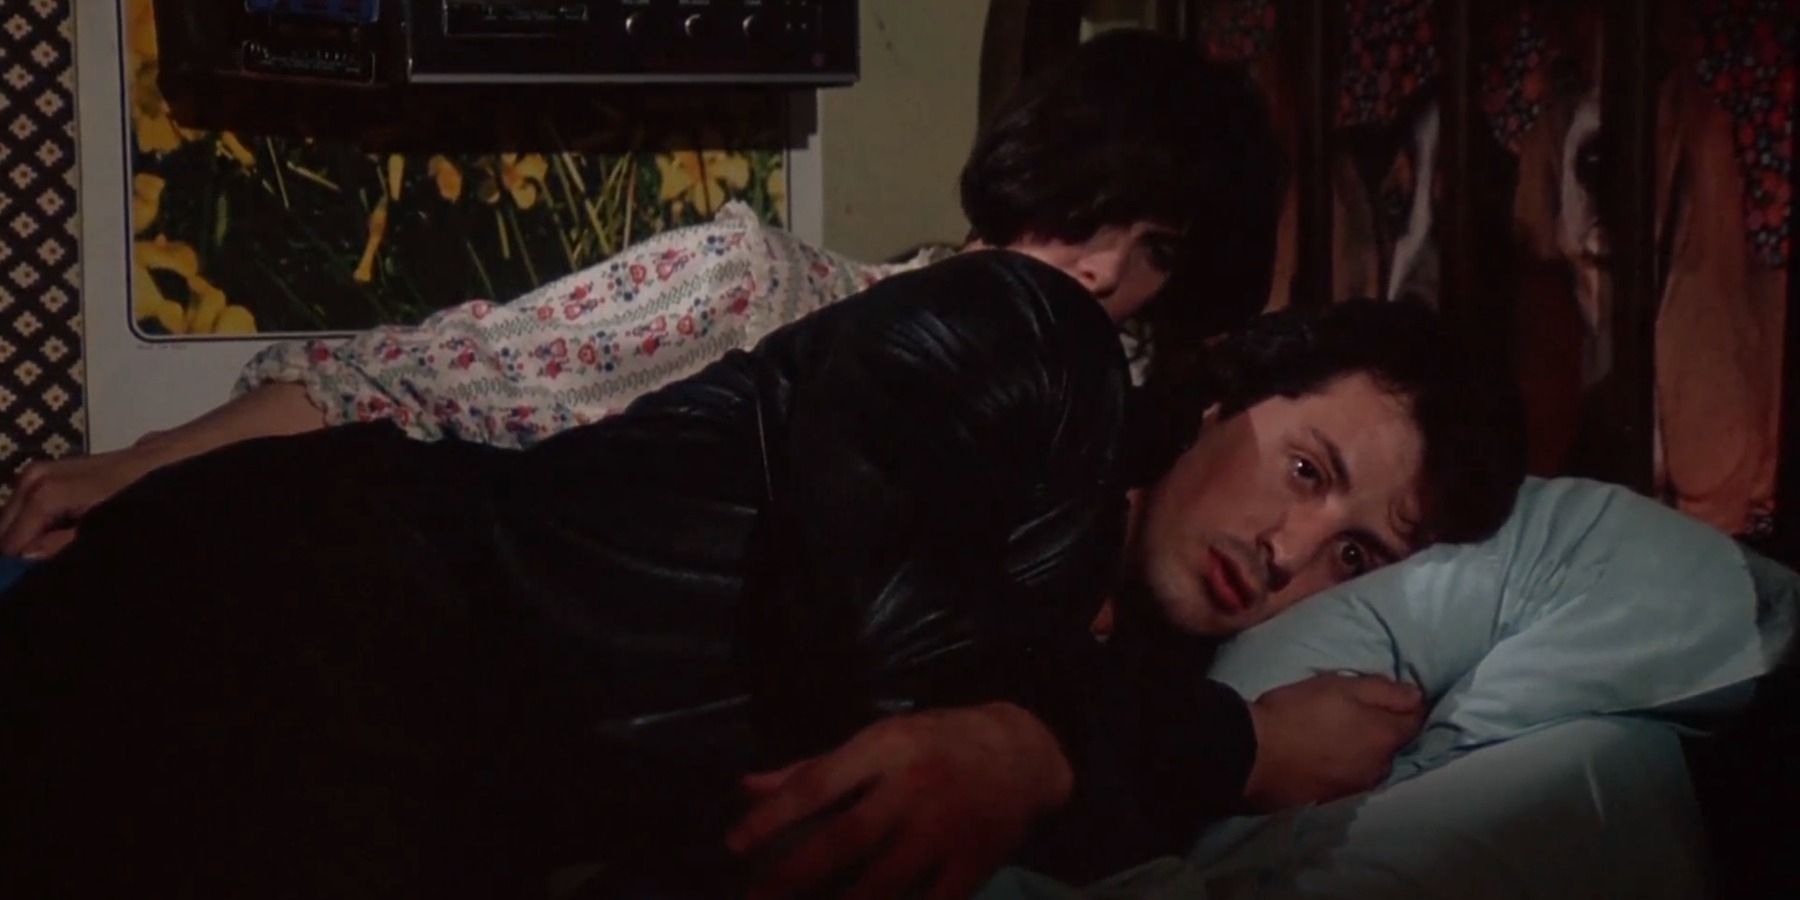 Sylvester Stallone as Rocky in bed with Talia Shire as Adrian